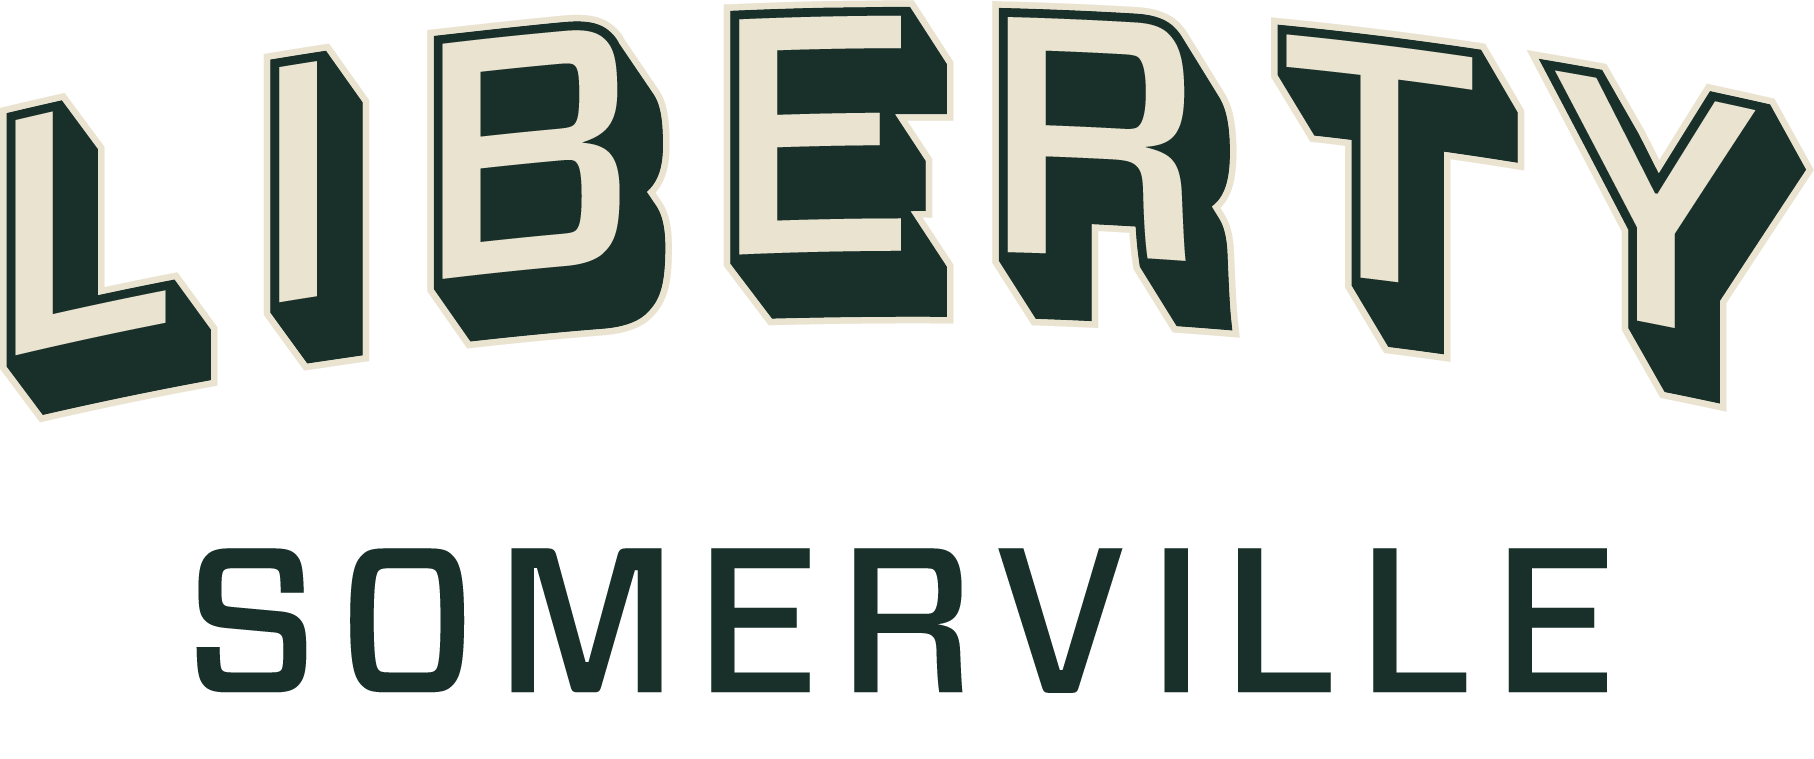 LibertyCannabis-VisualIdentity.FNL_Campaign-Logotype-City-2Color-OnLight_Somerville.png